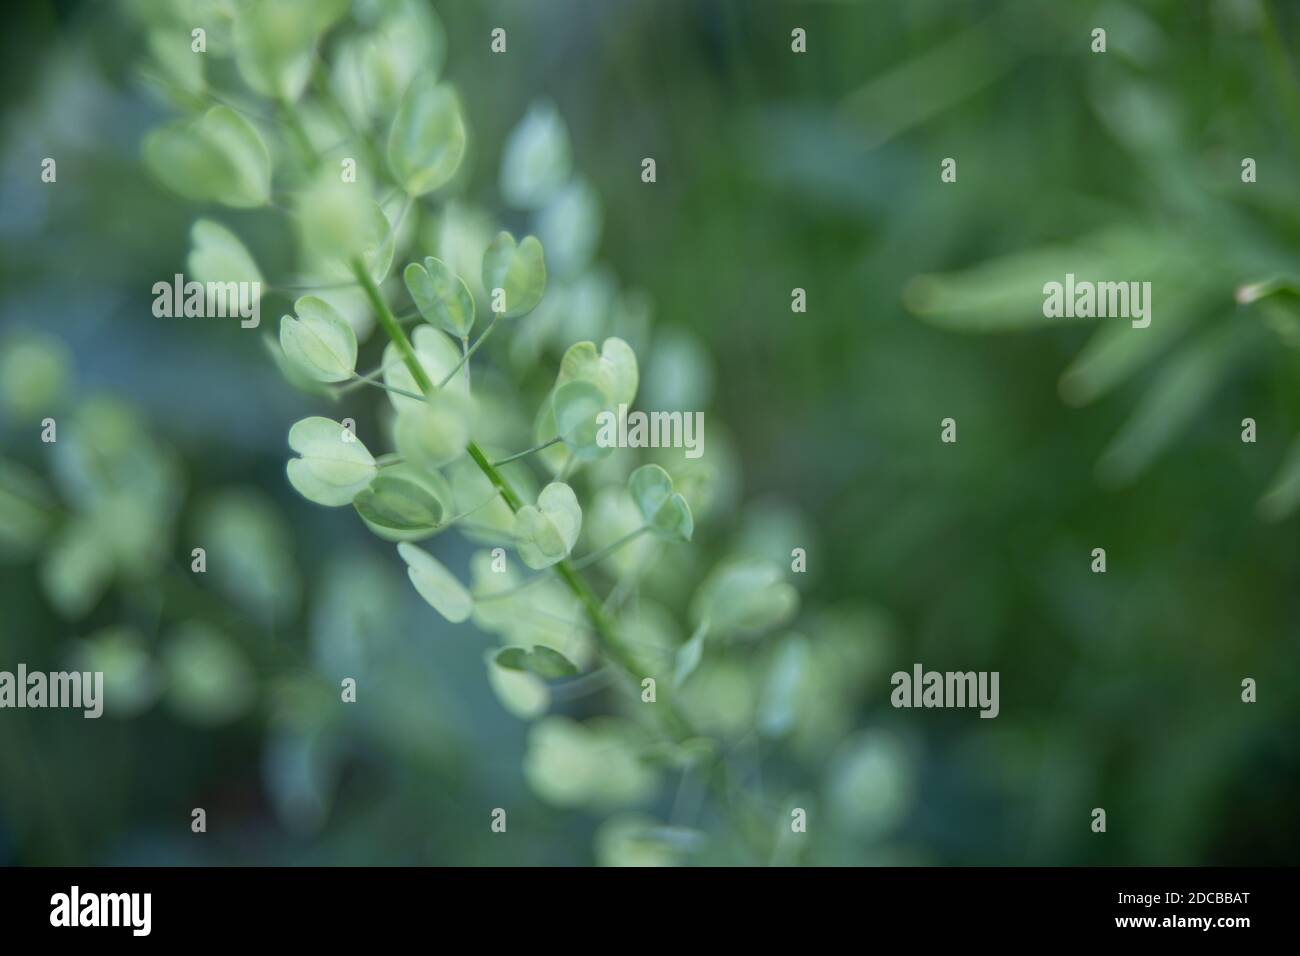 Wild plant with green small heart shaped leaves on a field Stock Photo